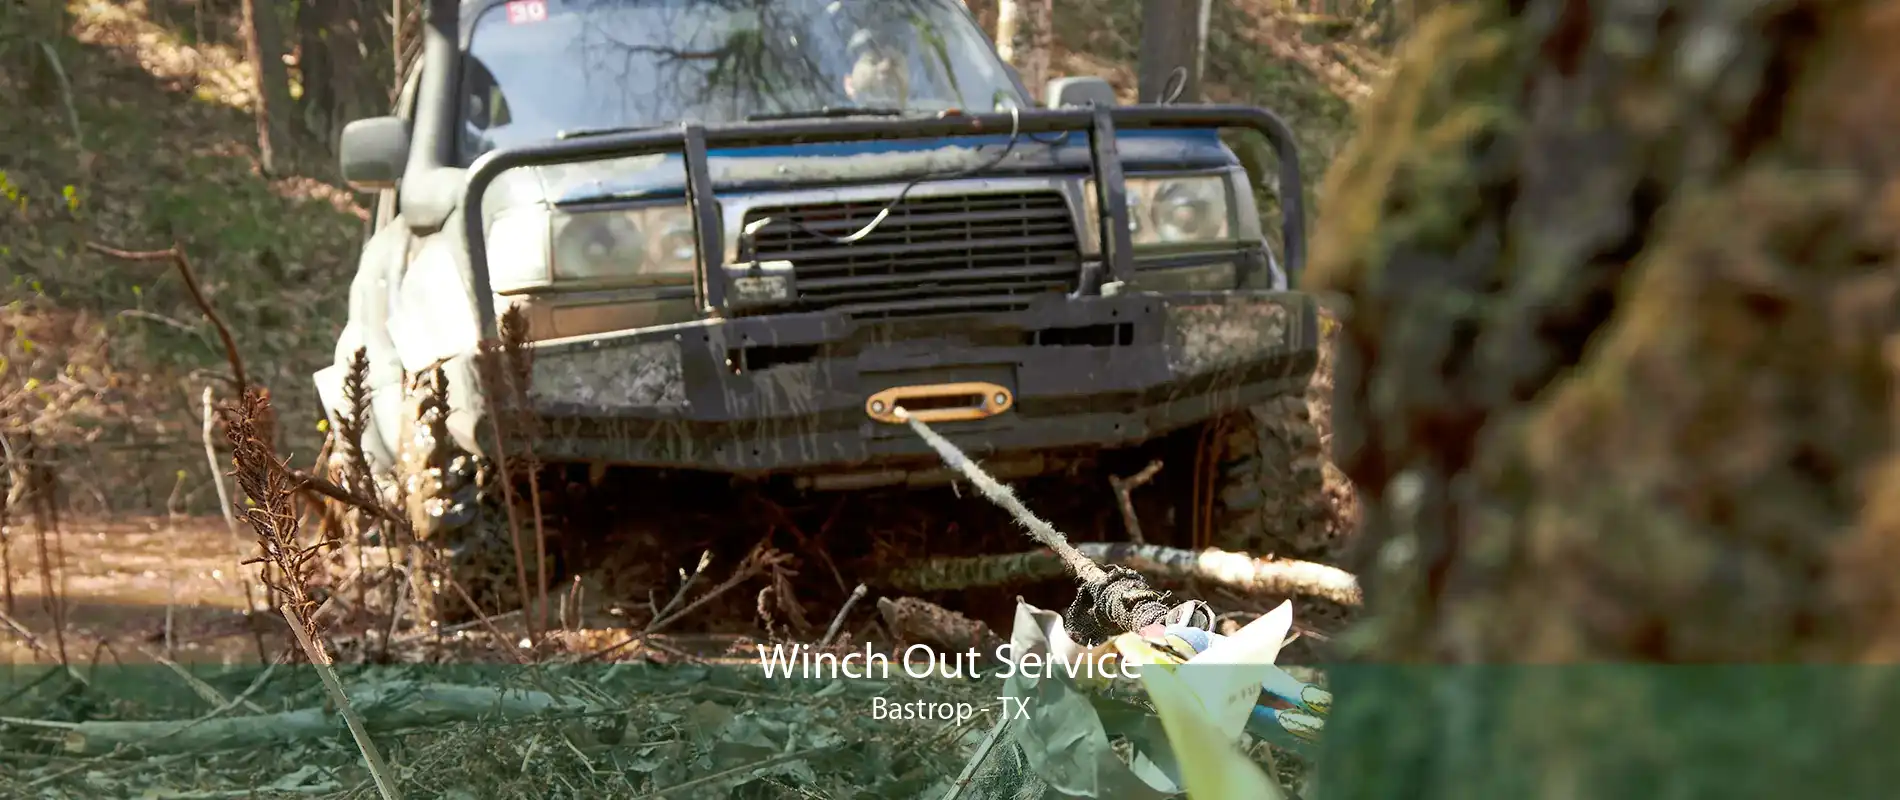 Winch Out Service Bastrop - TX